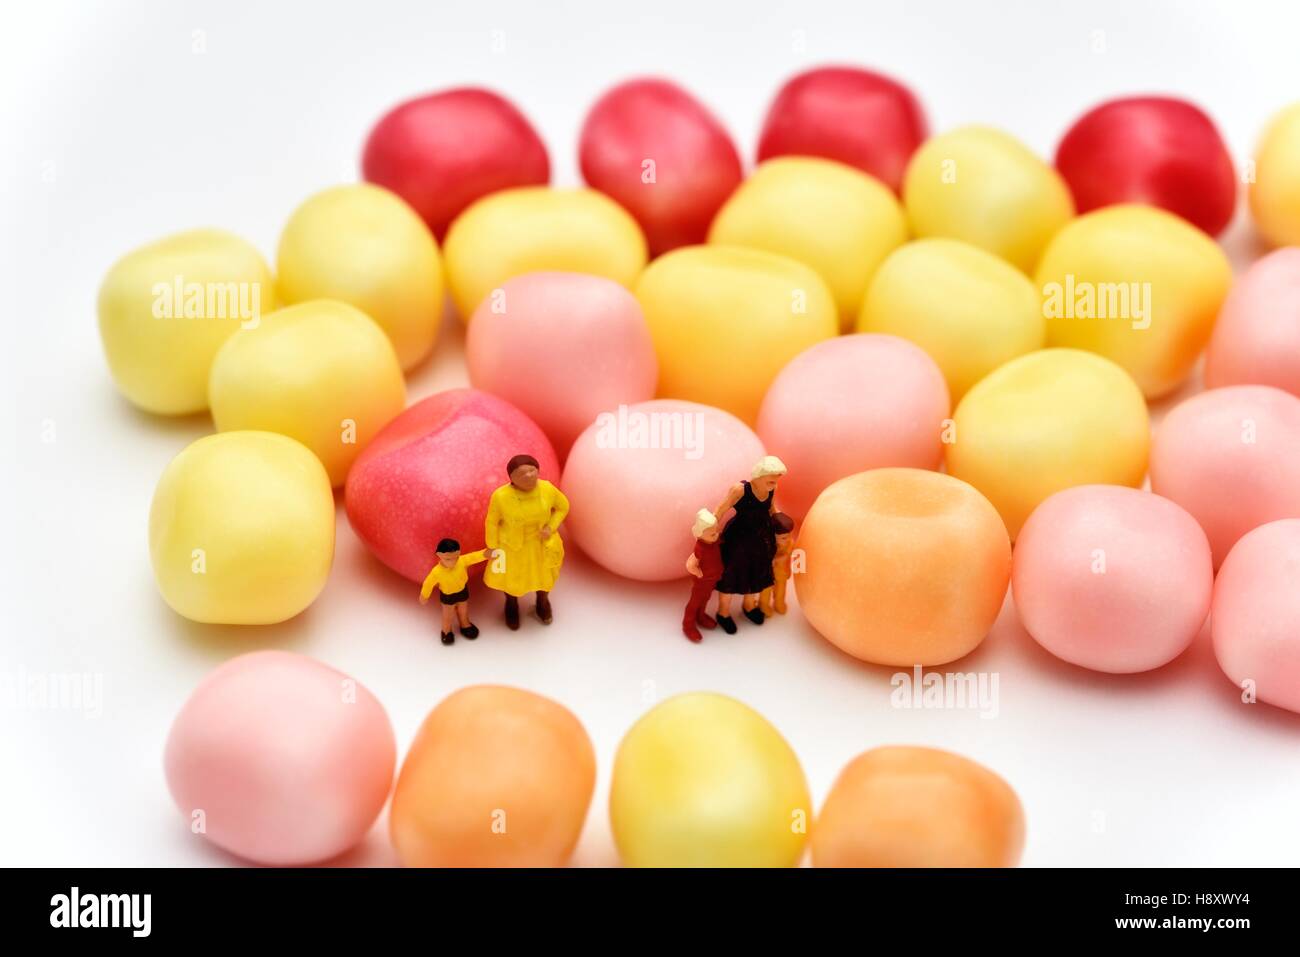 Miniature figurine mothers and children standing next to candy sweets Stock Photo